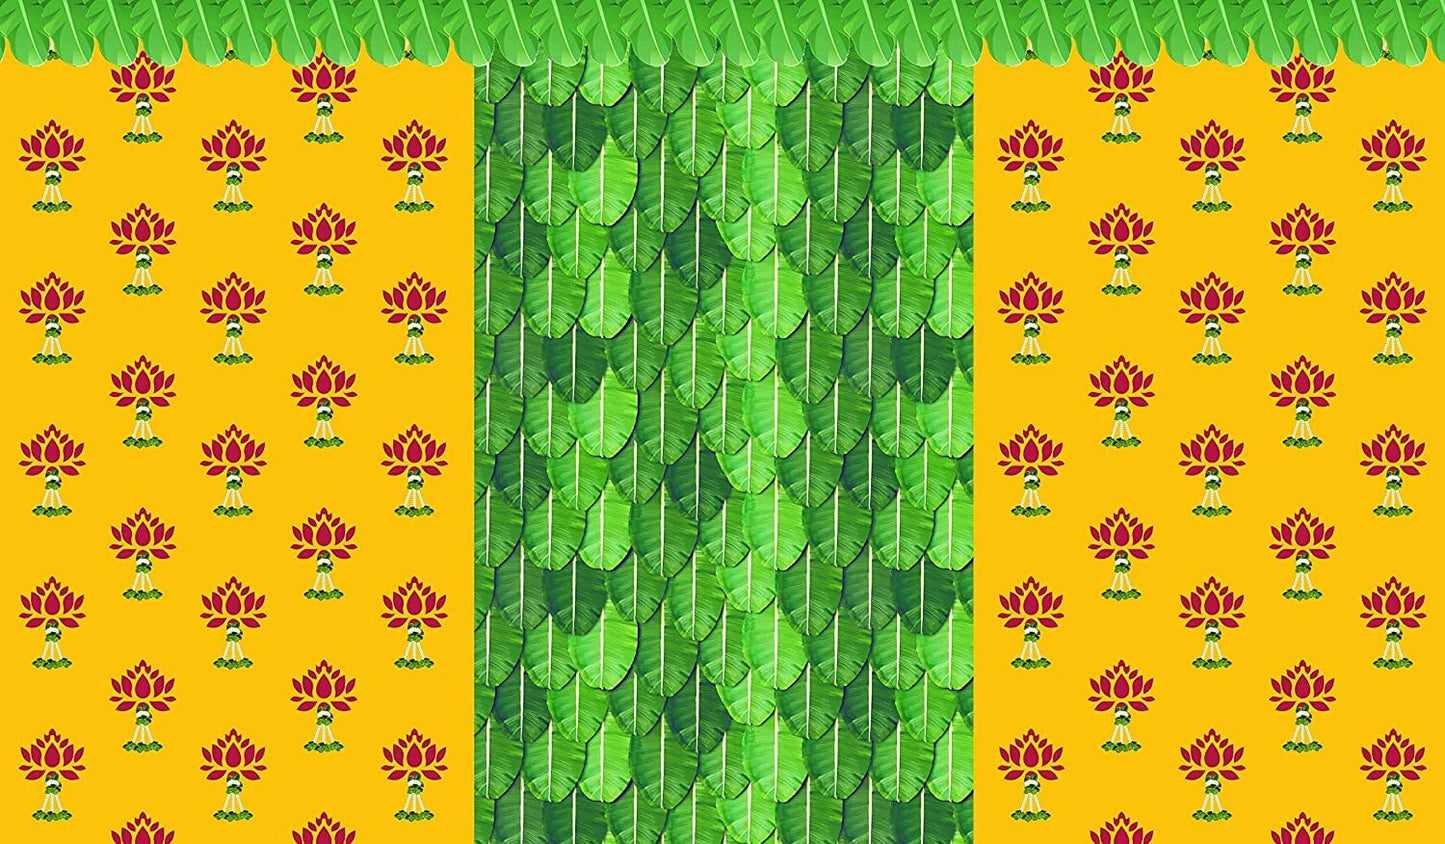 5 x 8 Ft - Banana Leaf With Lotus Flower Design - Traditional Backdrop Curtain for Pooja / Festival (Taiwan Polyester Fabric) (Washable)